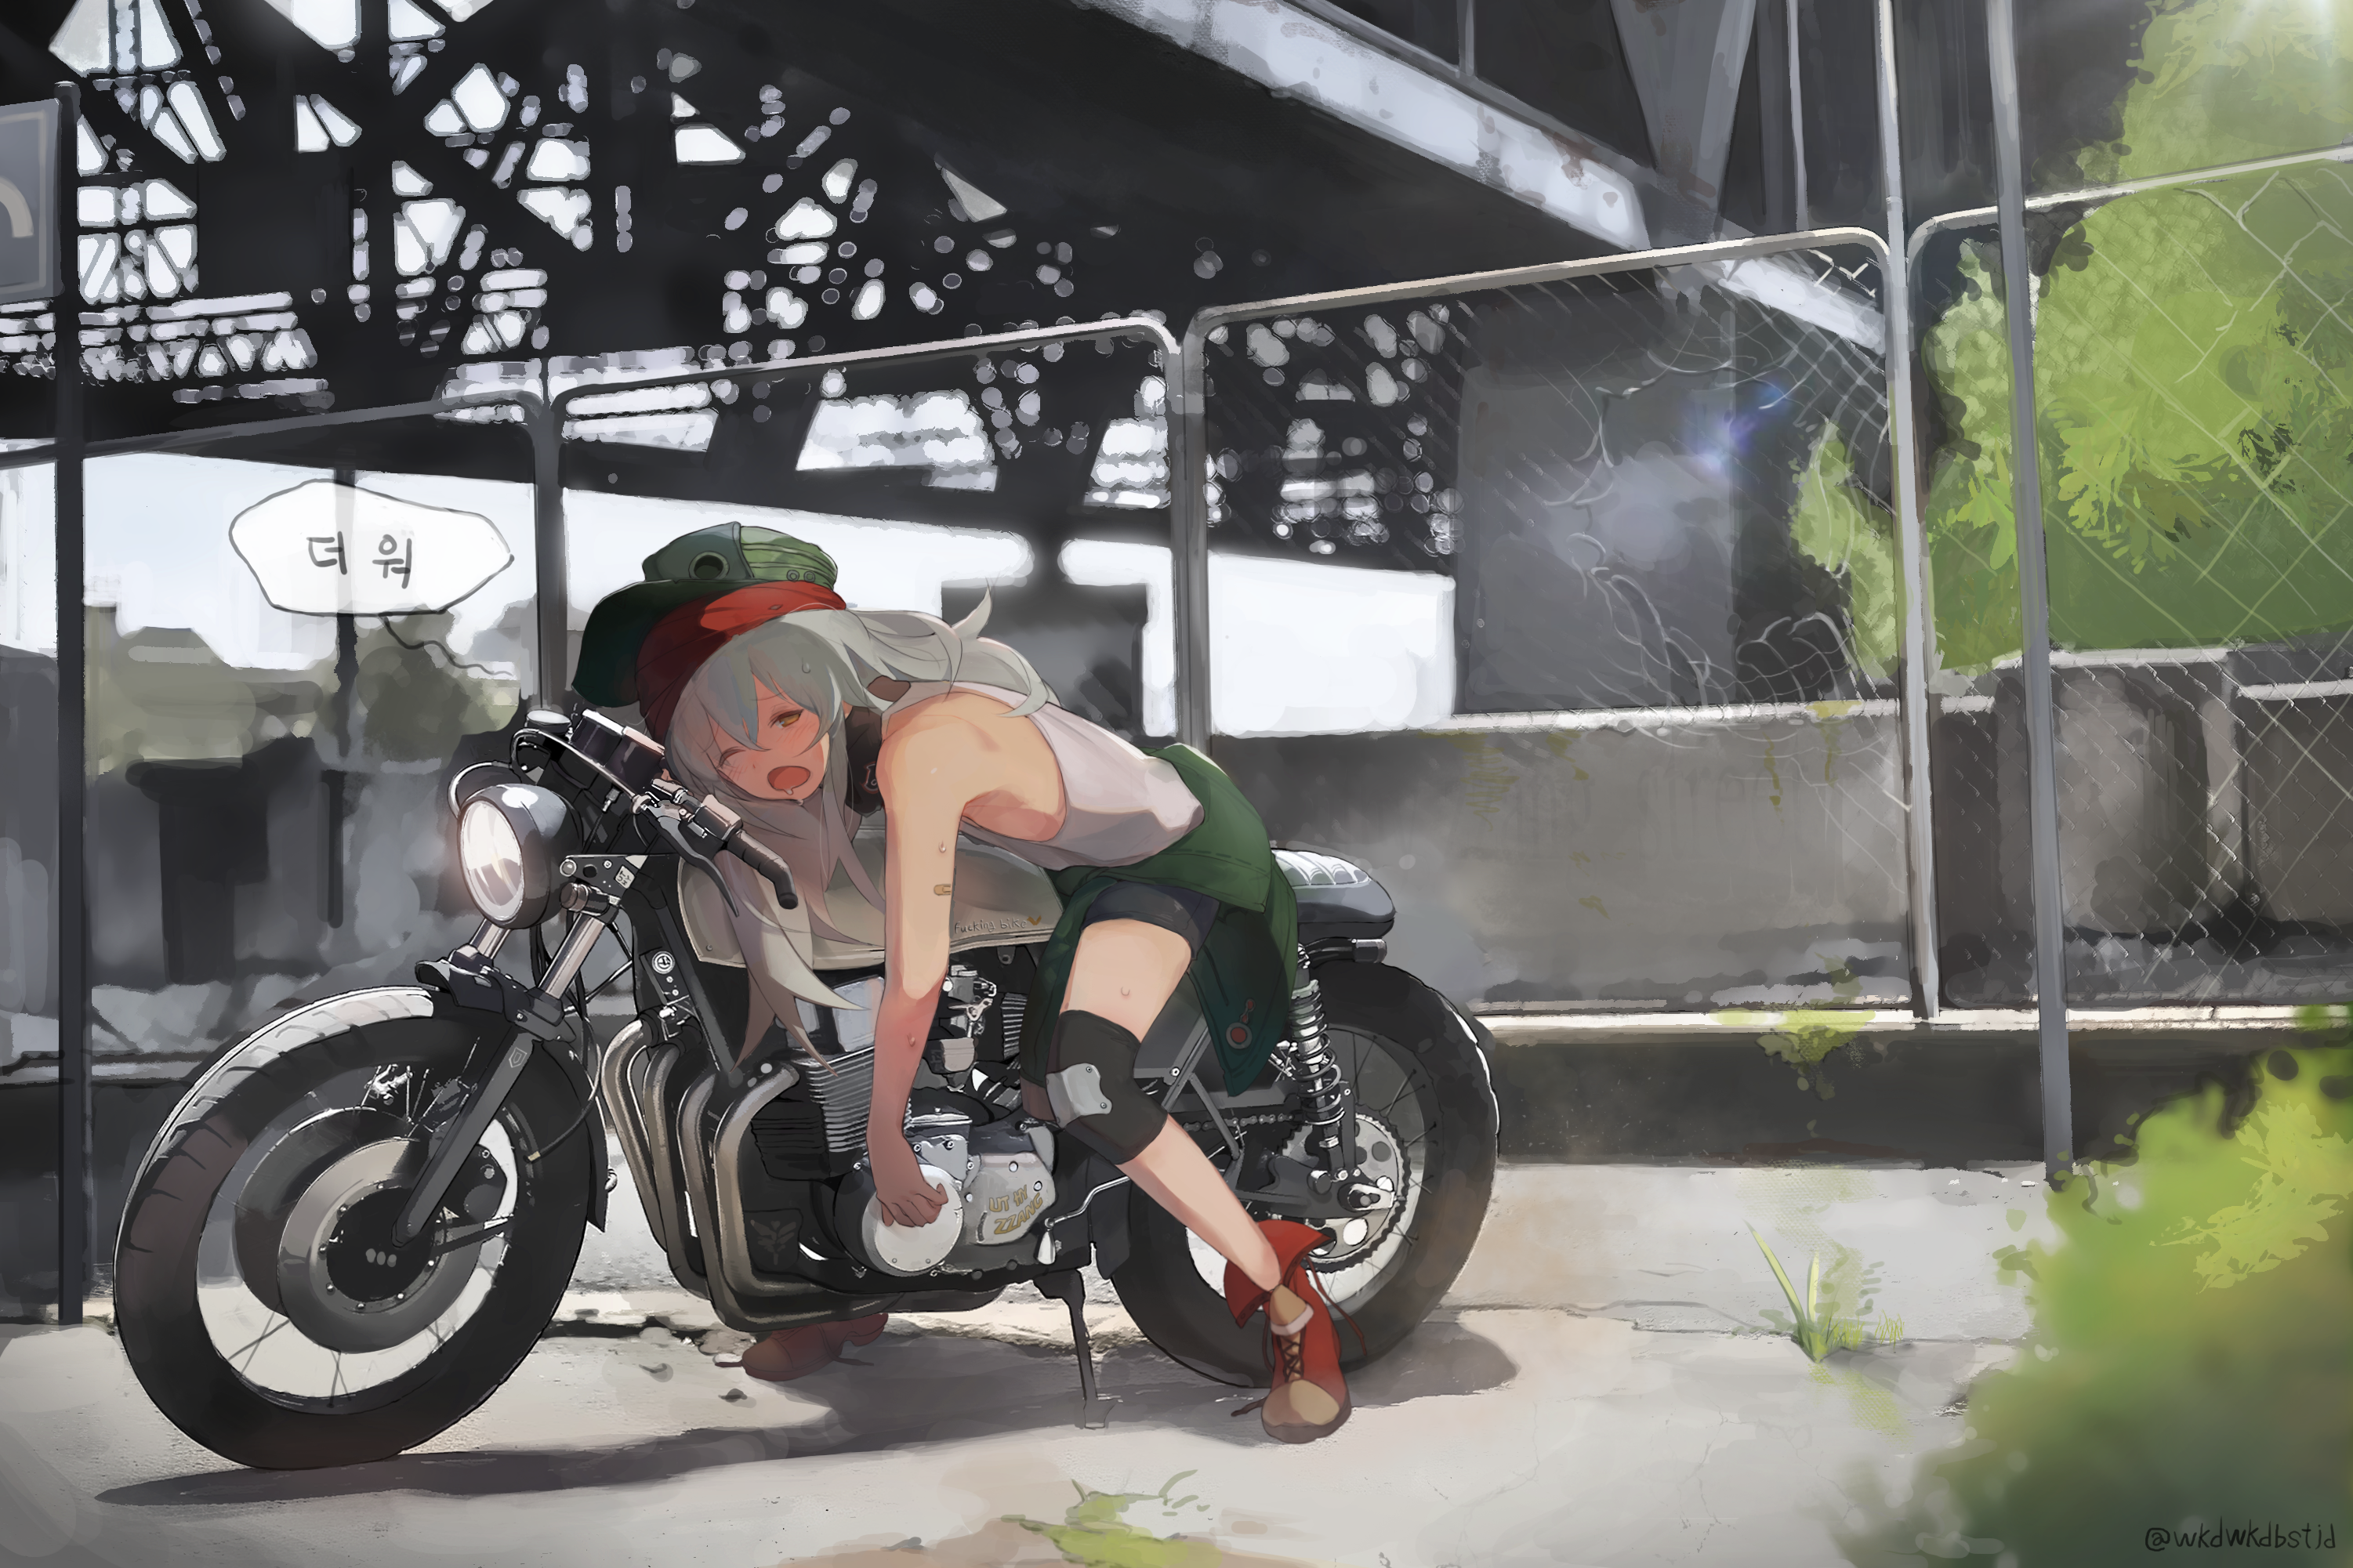 Women Silver Hair Baseball Caps Yellow Eyes Open Mouth Girls Frontline Tired Motorcycle Bushes Anime 3002x2001